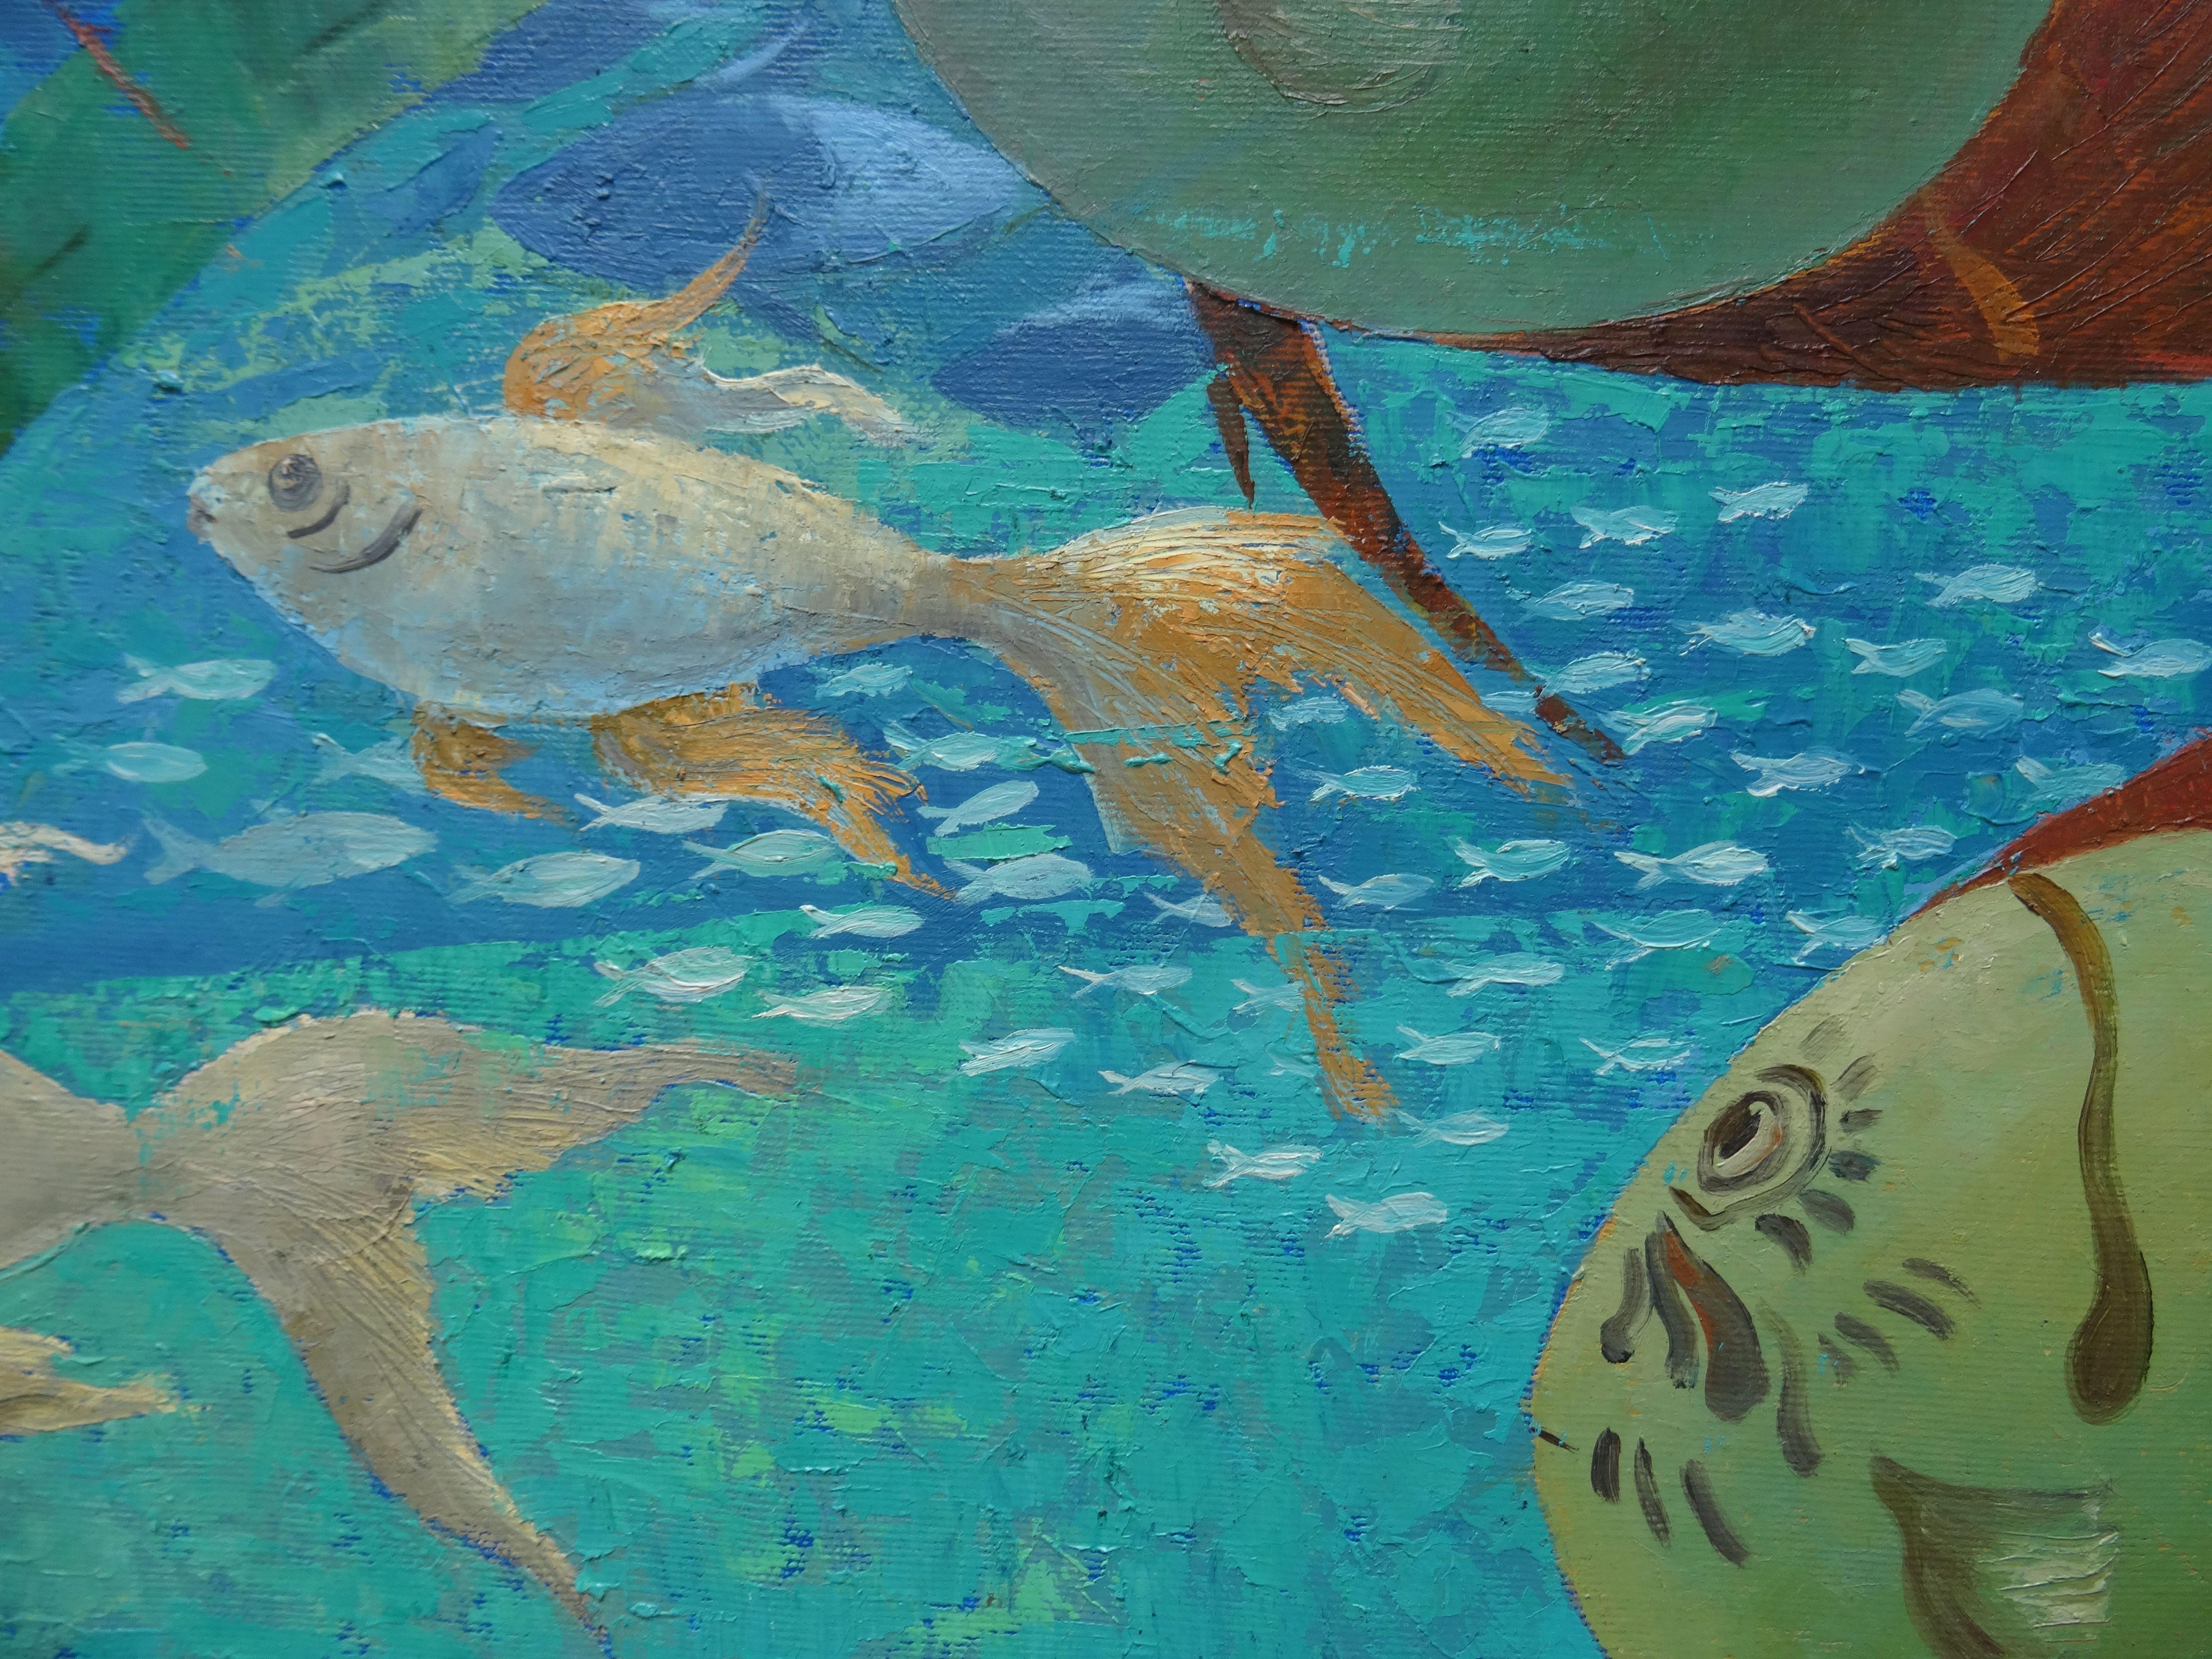 Fishes. Underwater world. Blue, green colors. 2018. Oil on canvas, 80x90 cm - Green Animal Painting by Nugzar Kakhiani (Kahiani)